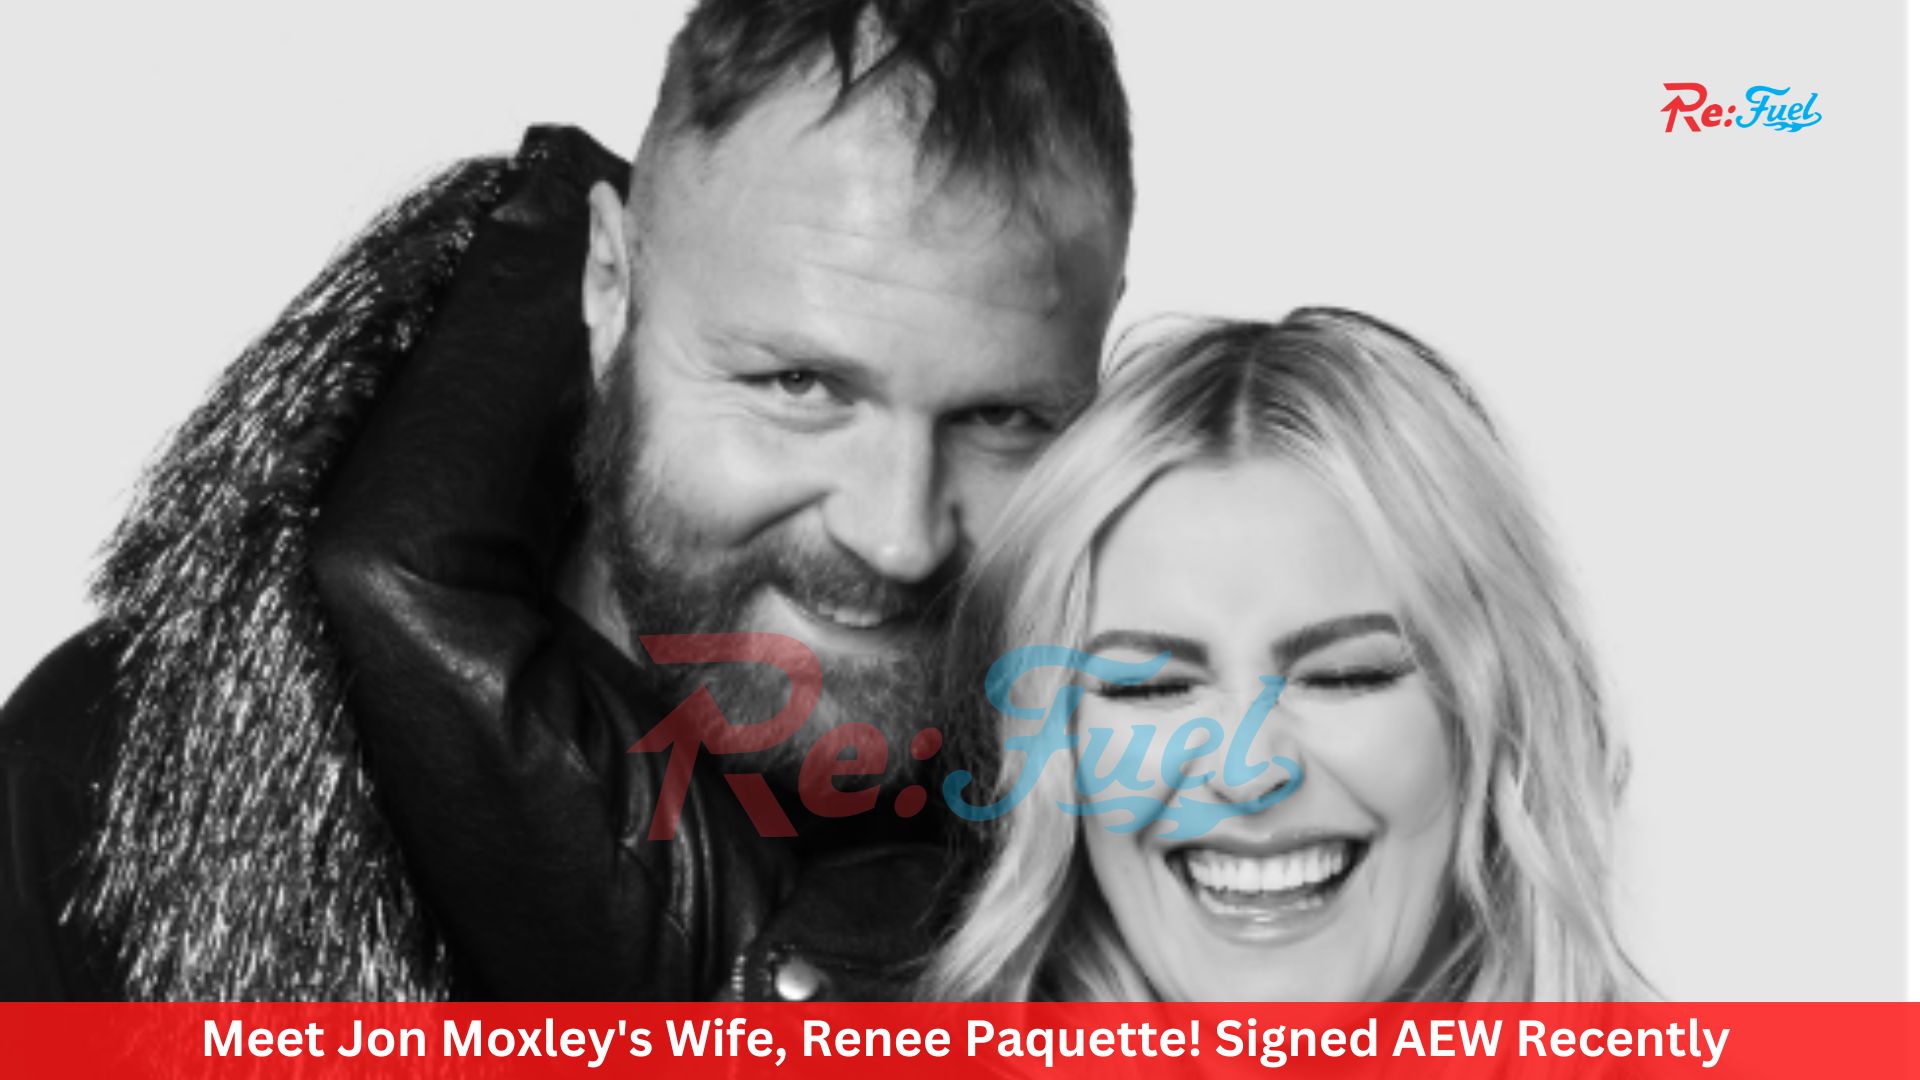 Meet Jon Moxley's Wife, Renee Paquette! Signed AEW Recently